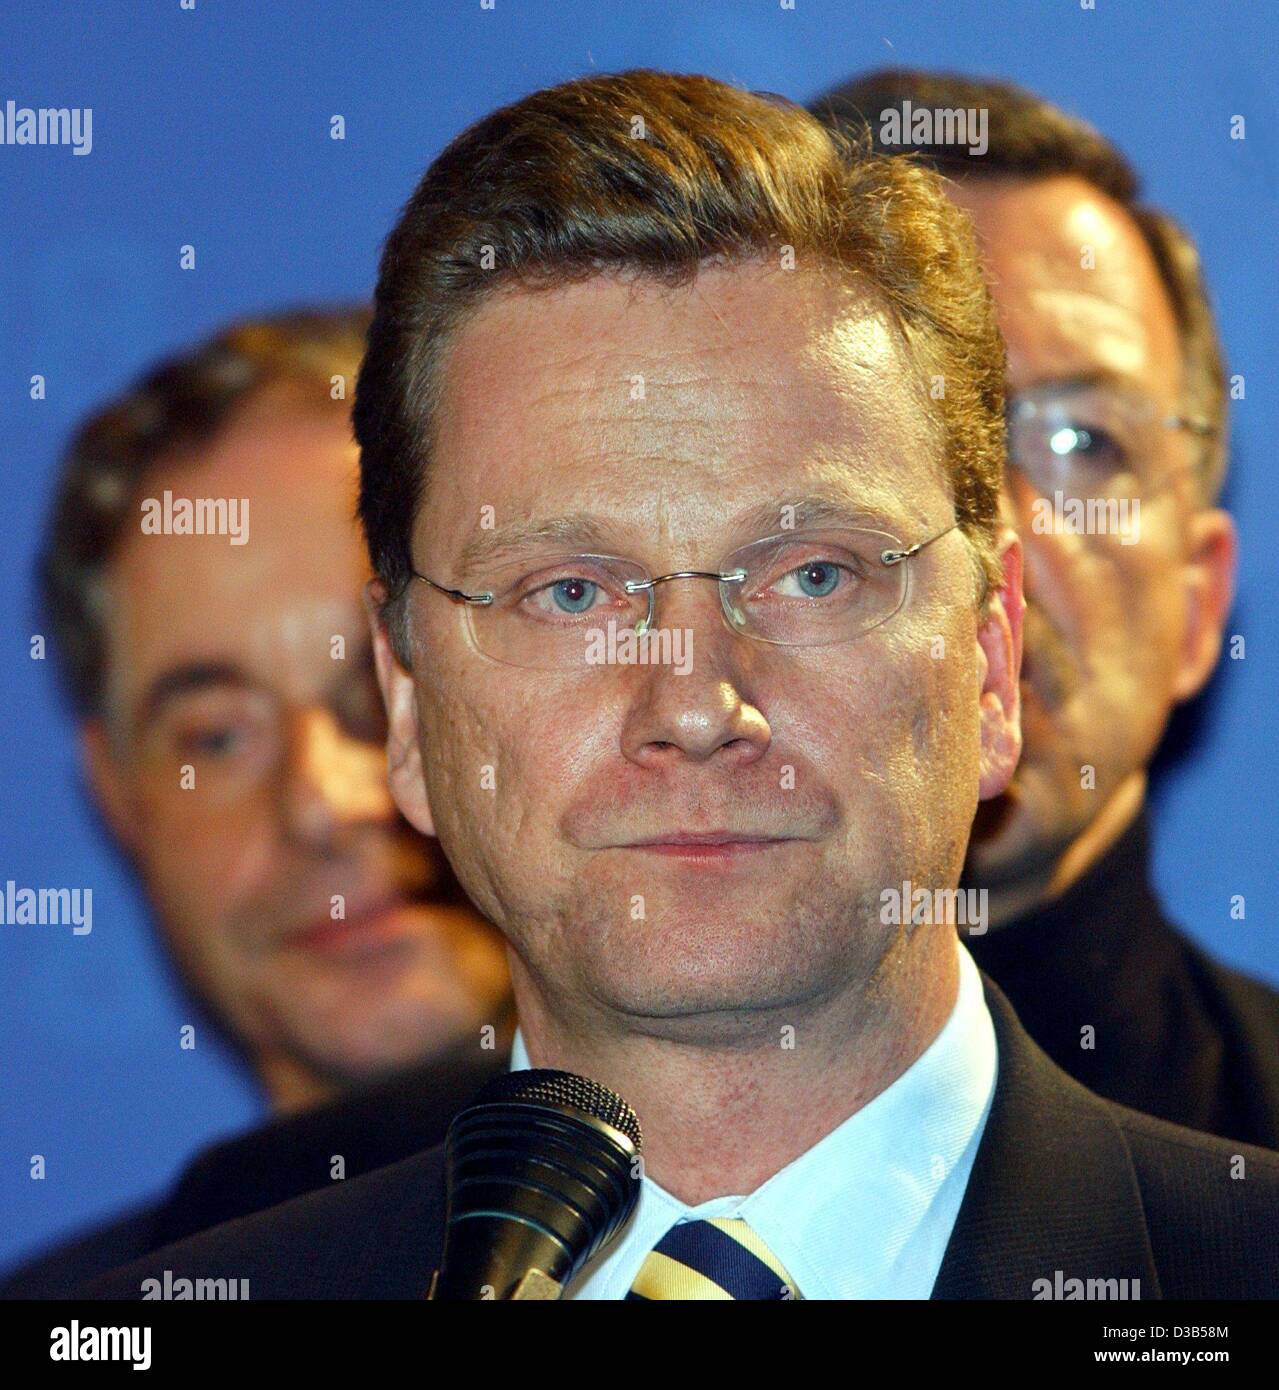 (dpa) - Guido Westerwelle (C), Chairman of the Liberal Party FDP, comments on the disappointing preliminary results after the elections in the FDP headquarters in Berlin, 22 September 2002. In the background FDP Committee member Walter Doering (R). According to estimates the FDP wins only 7.4 per ce Stock Photo